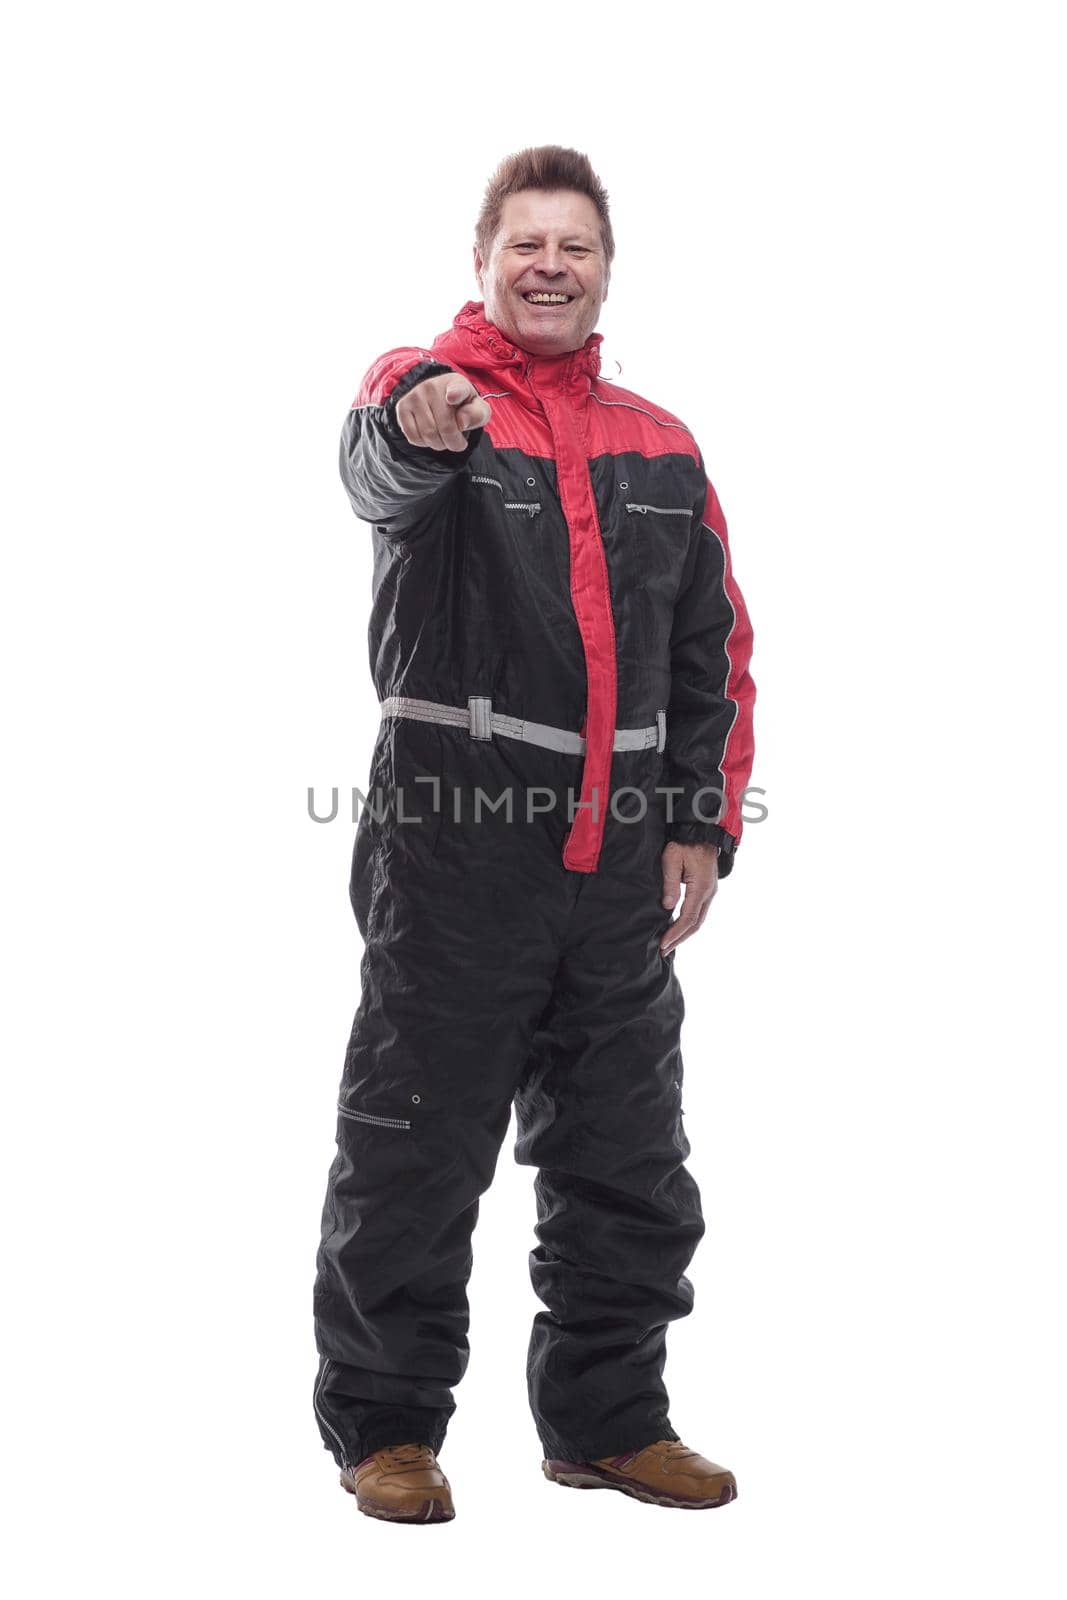 in full growth. happy man in winter insulated overalls. isolated on a white background